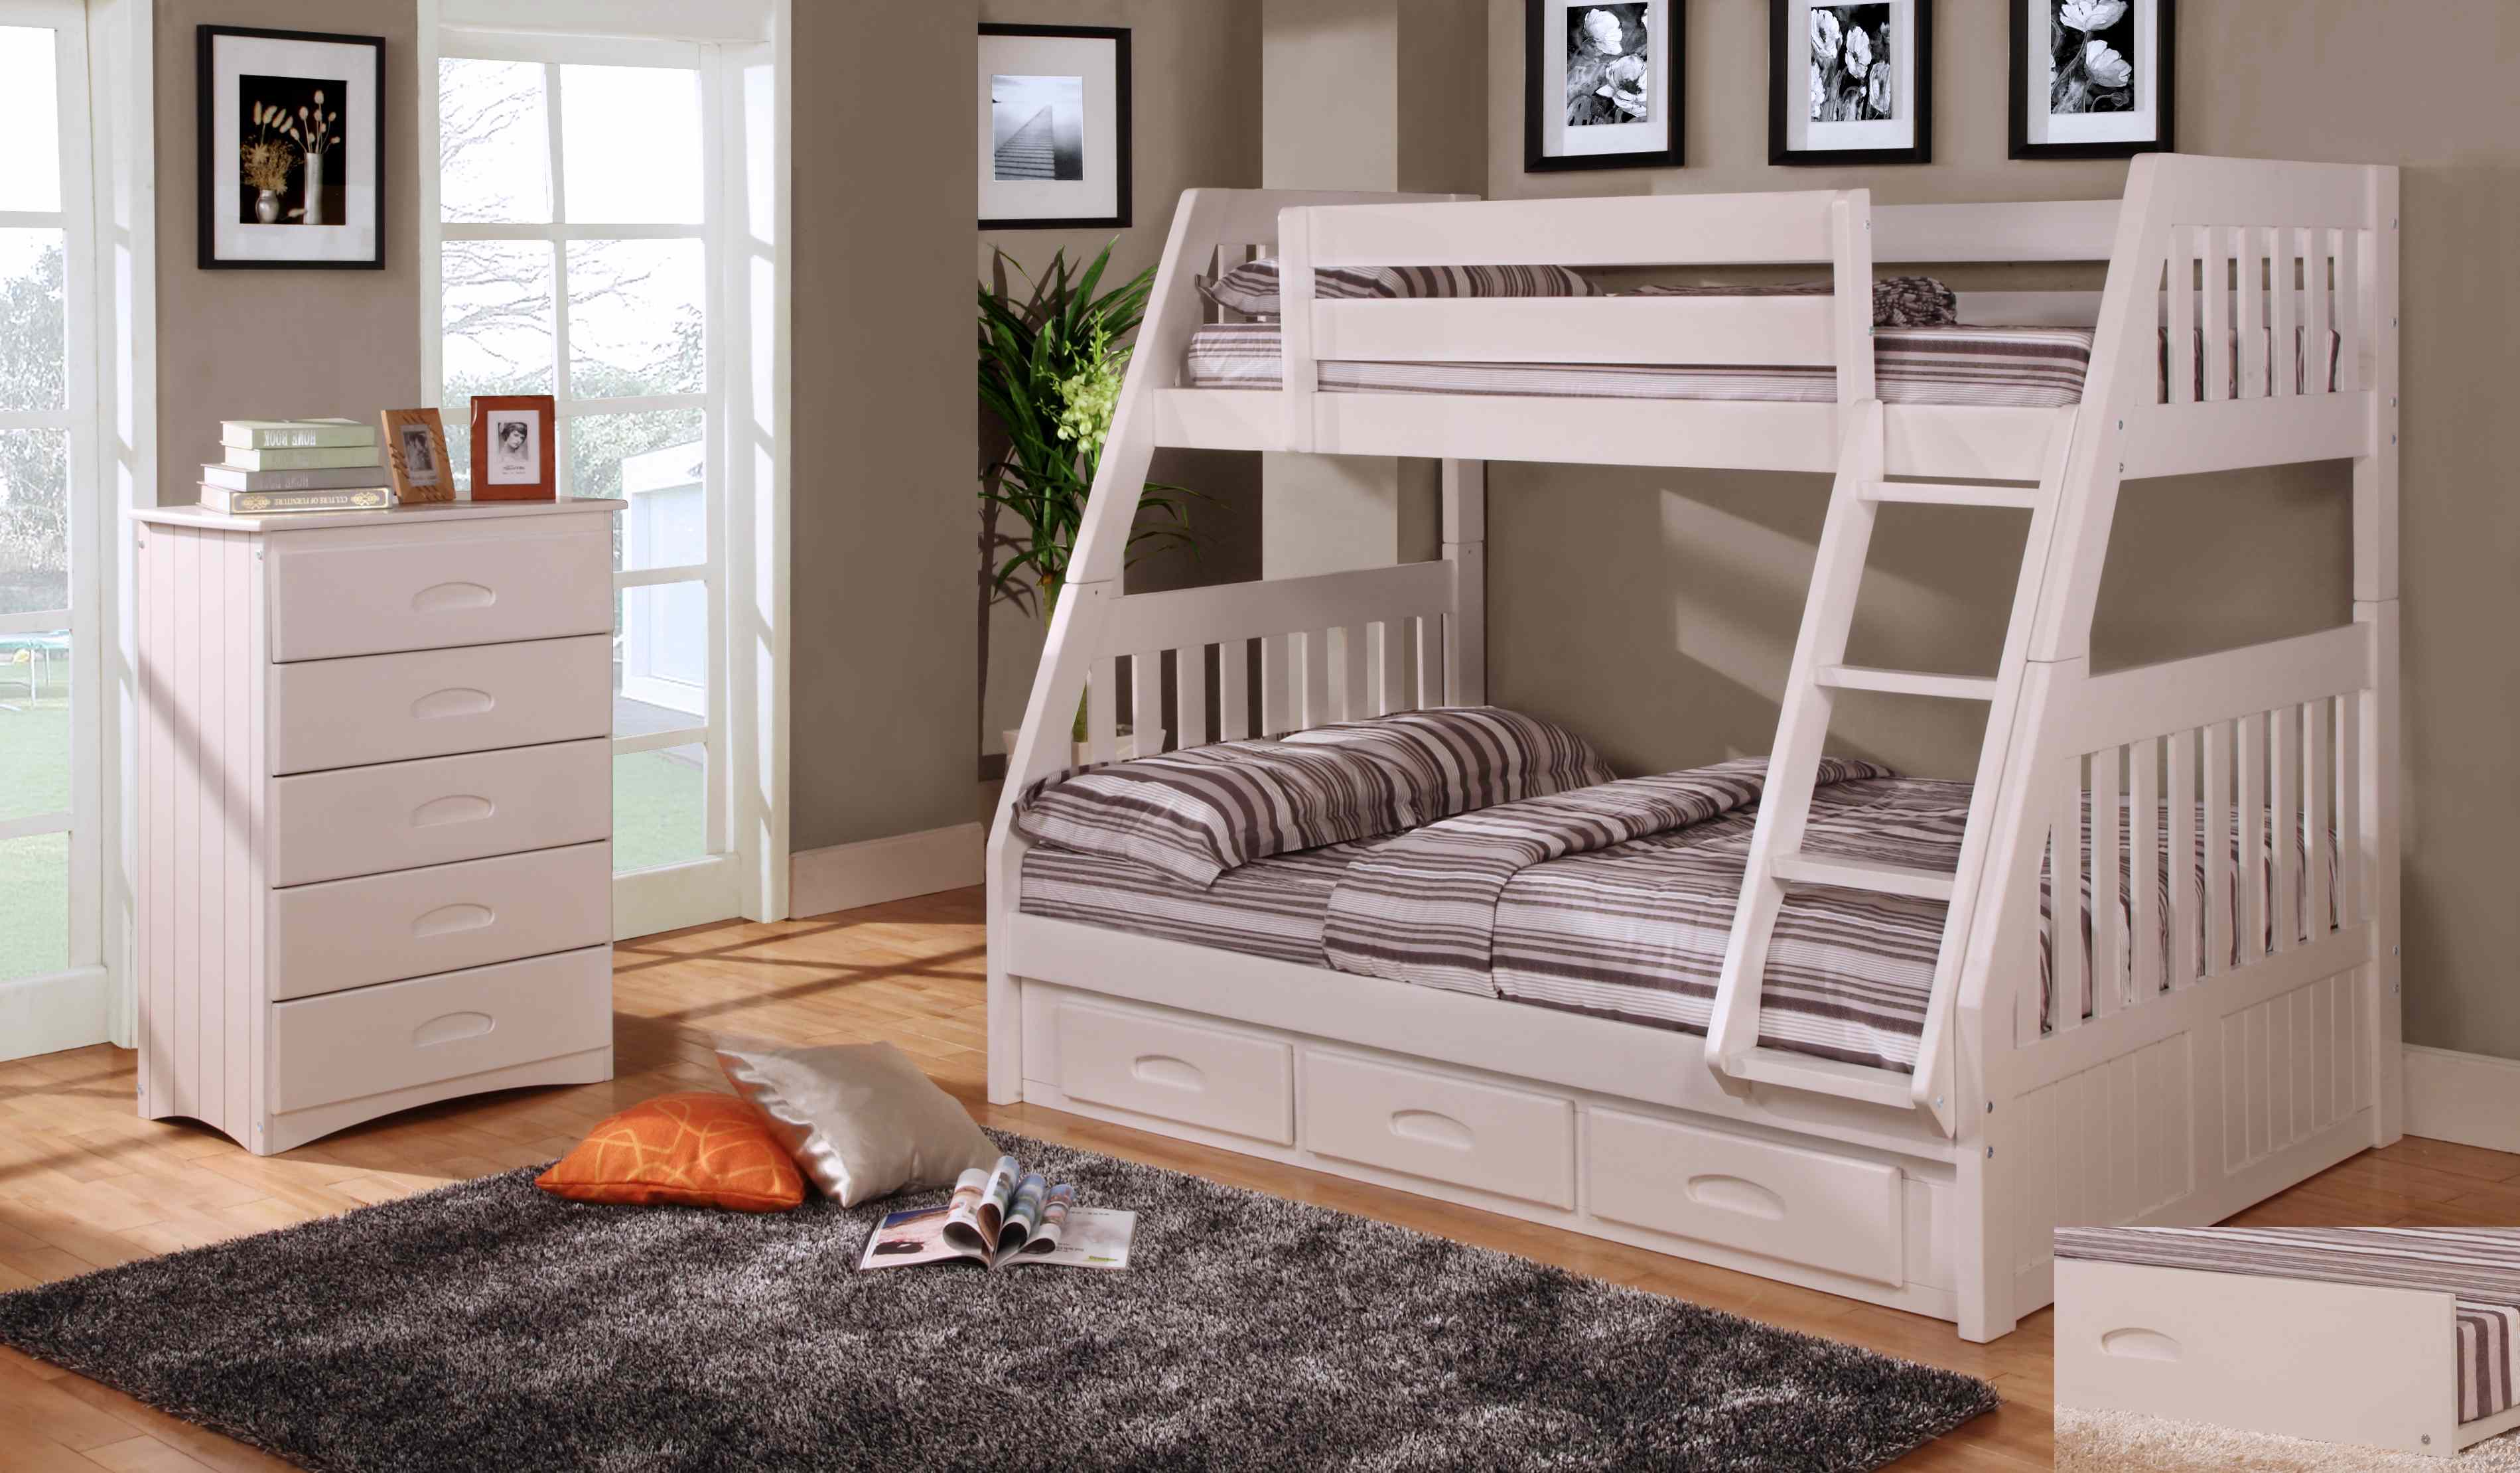 Kids Bunk Bedroom Sets New Daily Offers, Kids Bunk Bed Sets